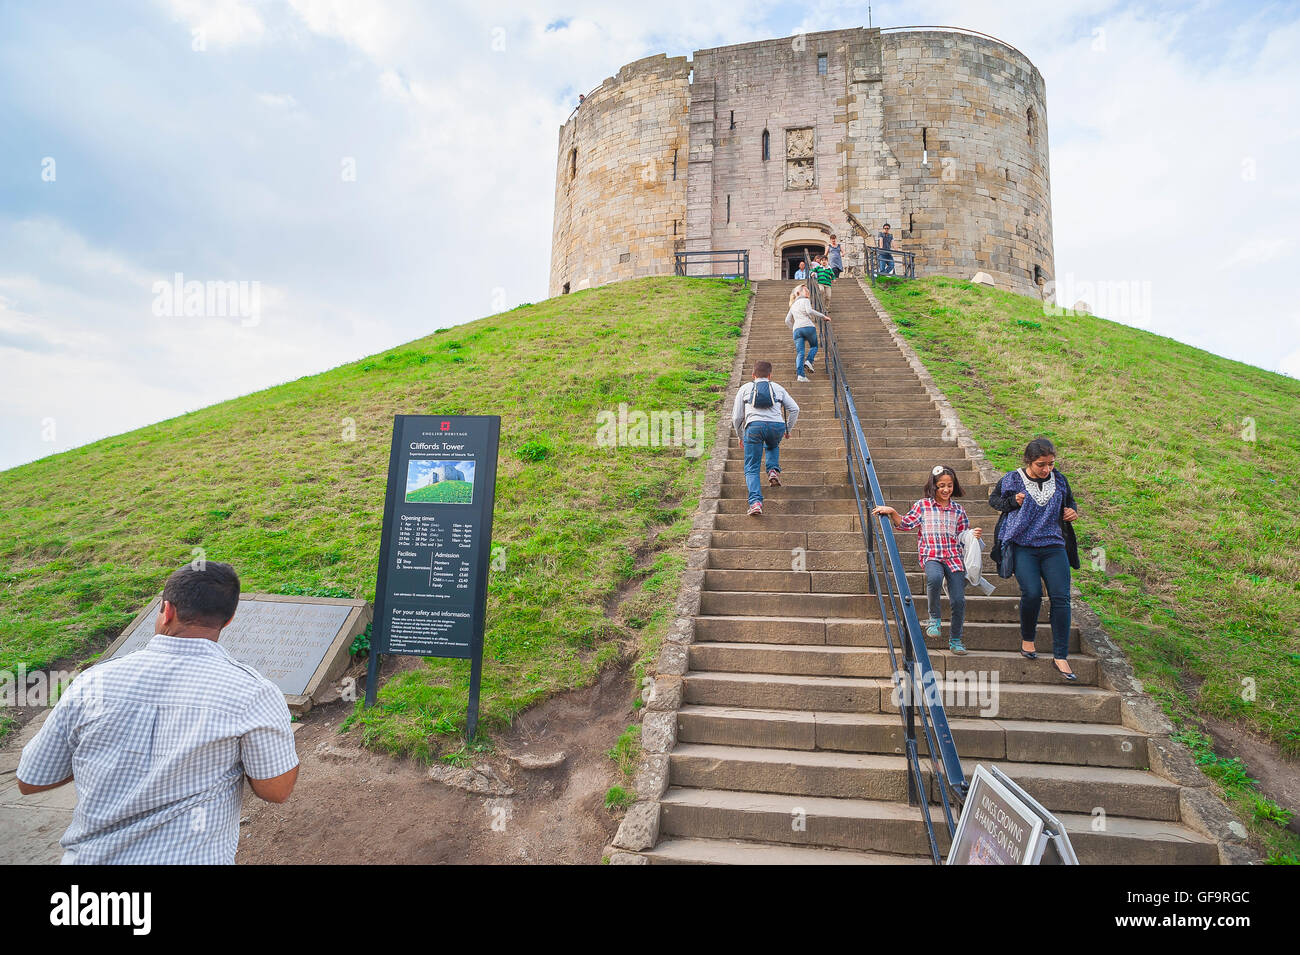 York UK tourism, view of tourists visiting the Norman keep known as Clifford's Tower in the centre of the city of York, Yorkshire, England. Stock Photo